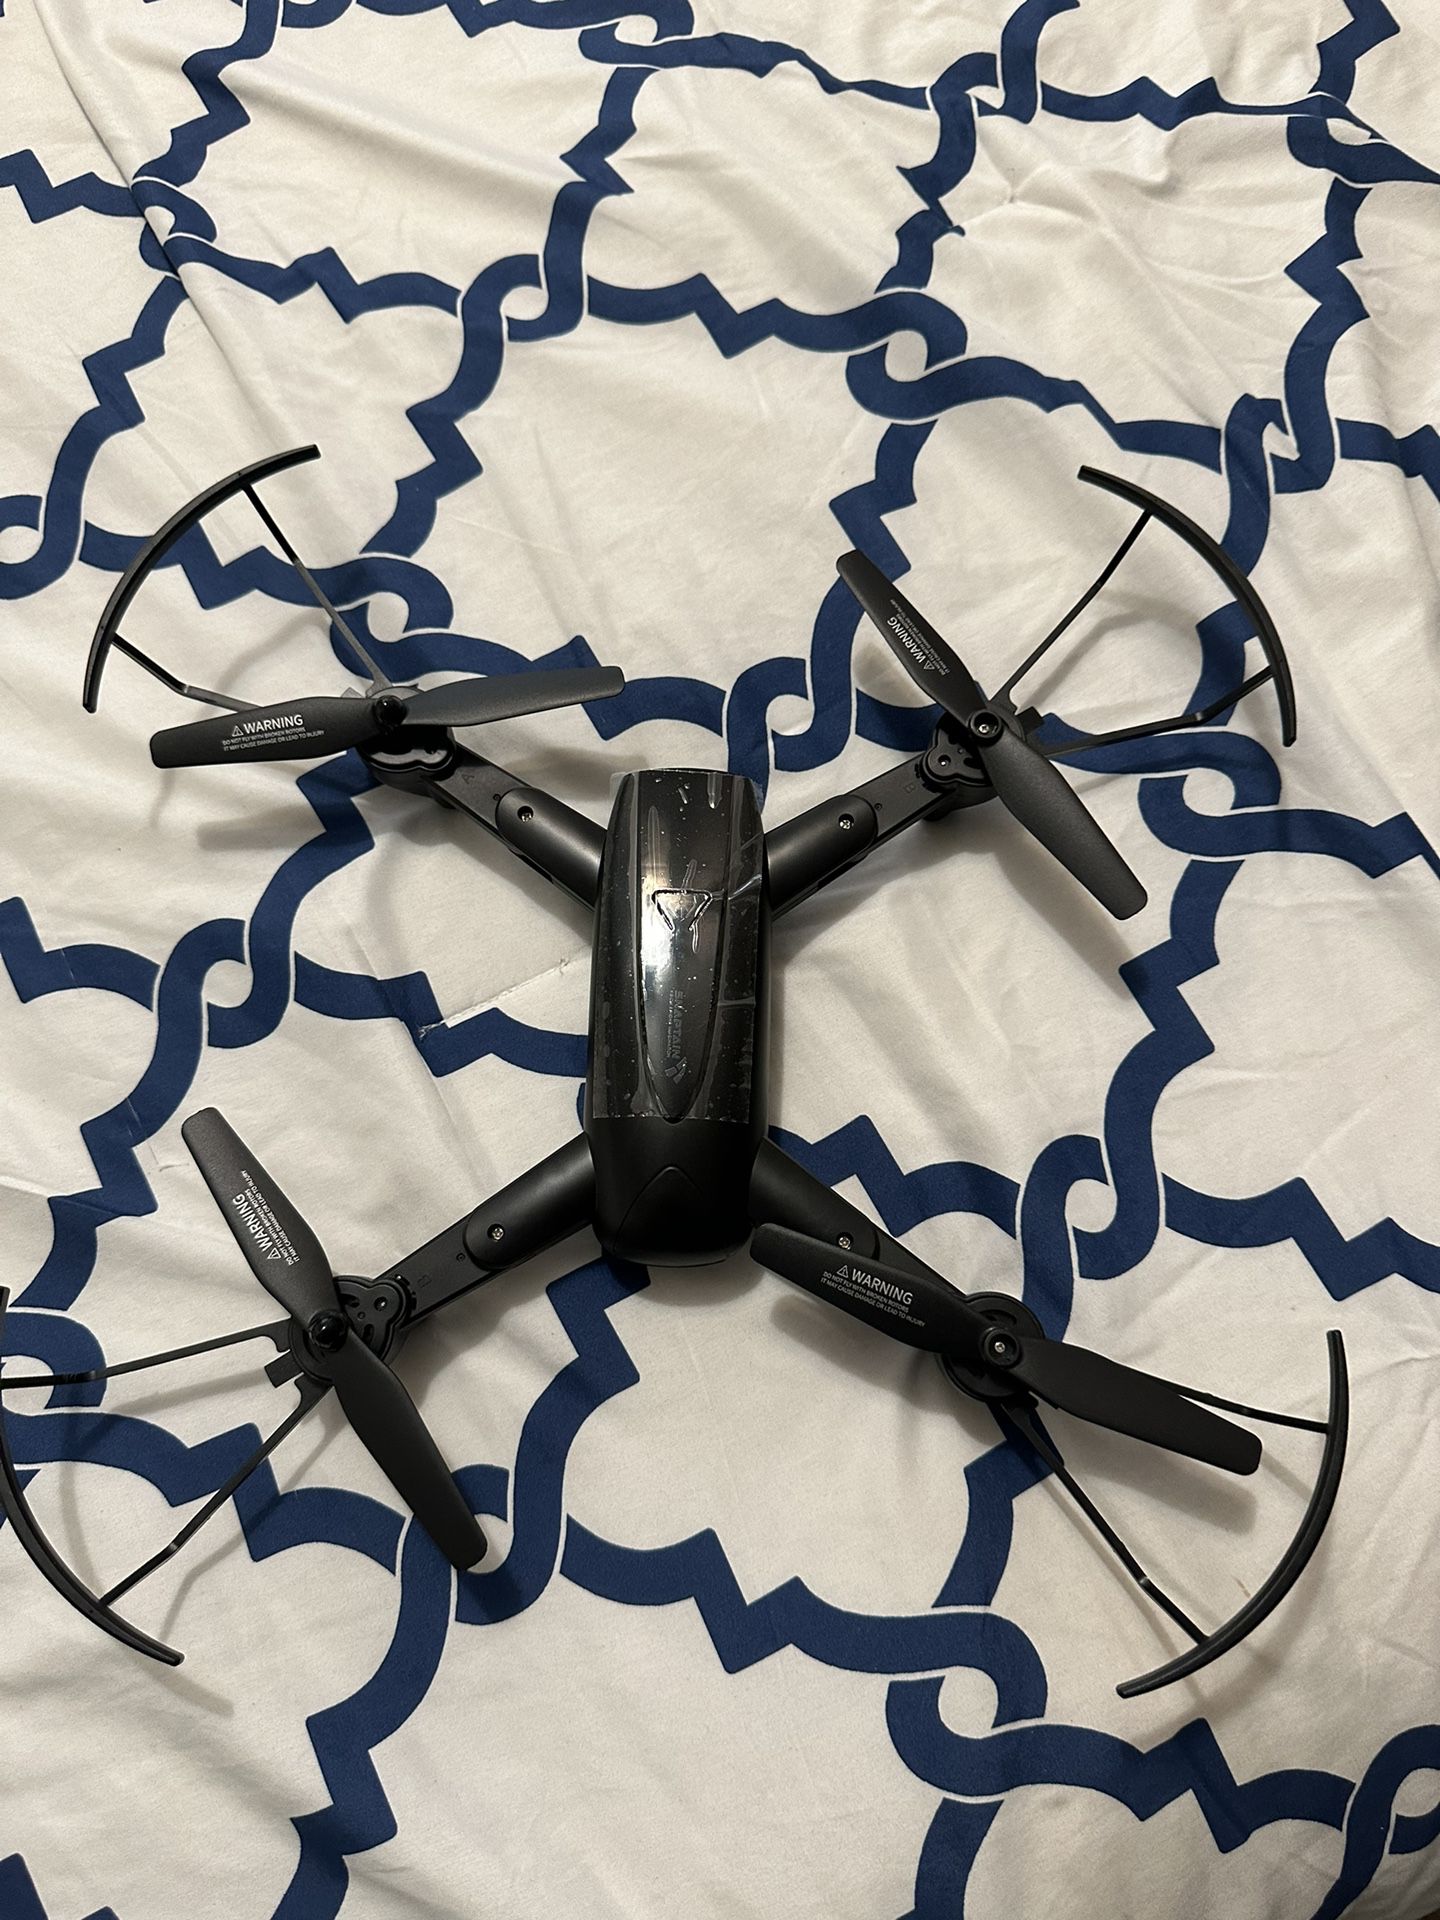 Sp500 Drone 